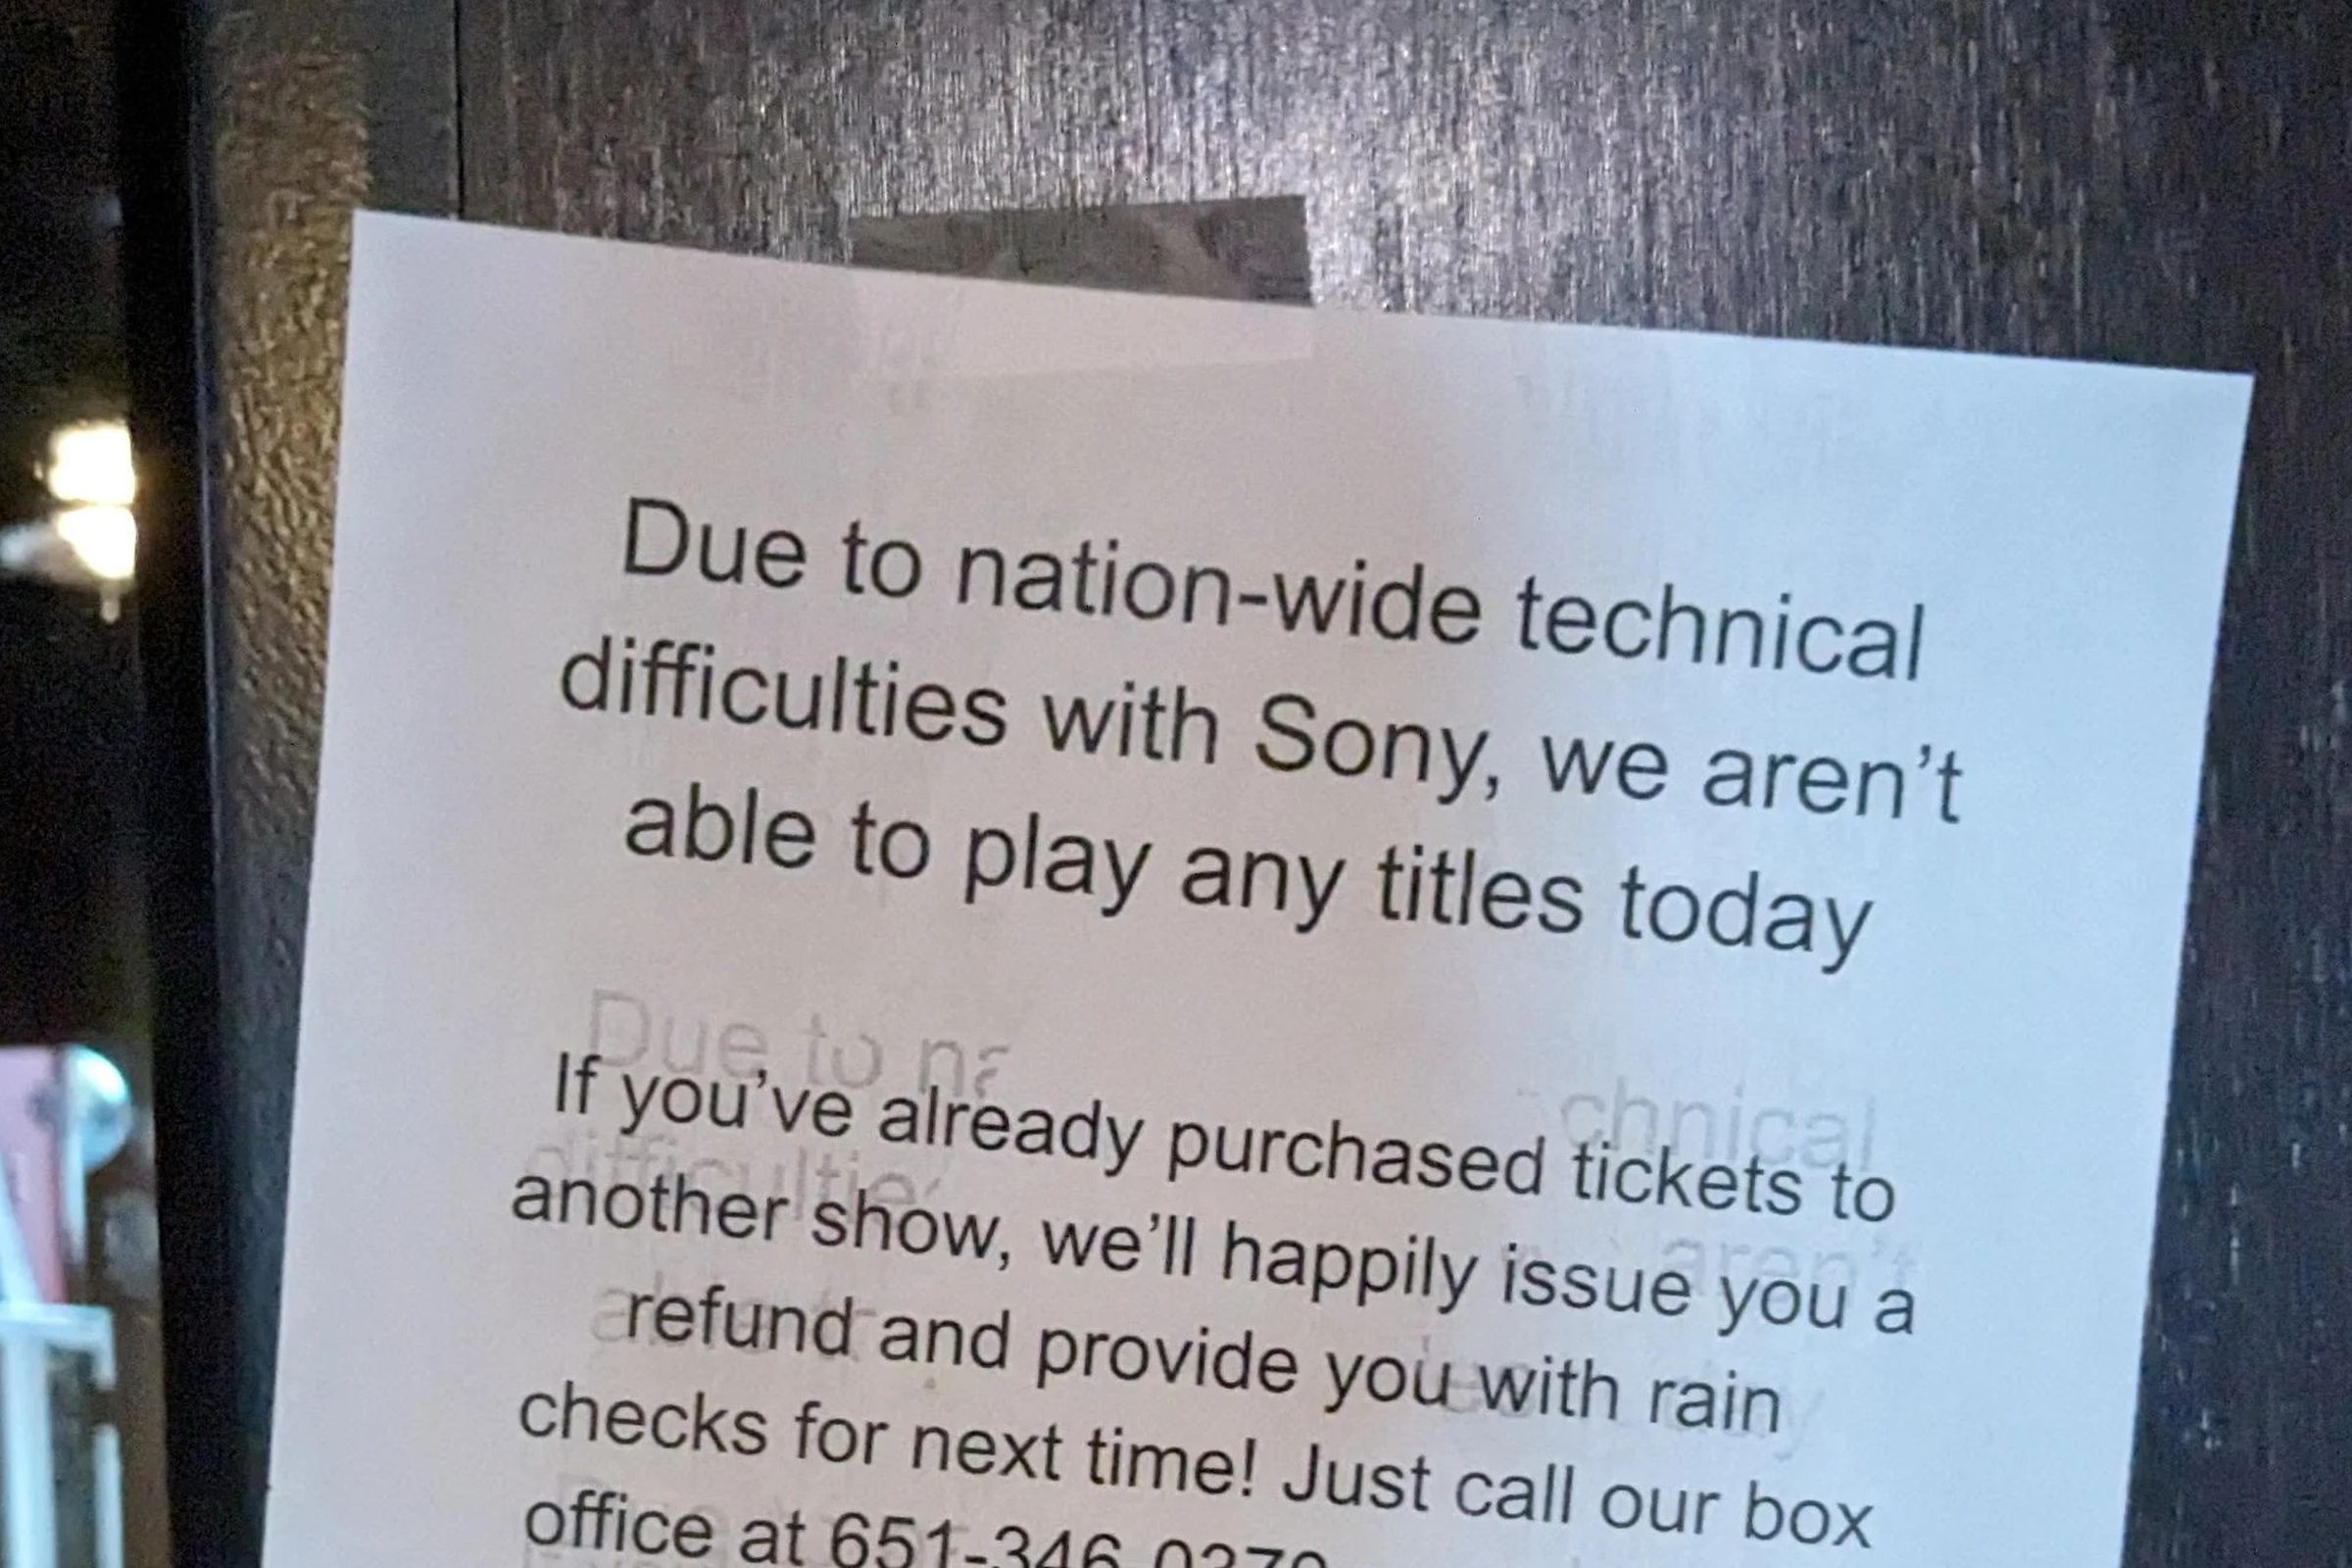 A sign reportedly placed at Alamo Drafthouse’s Minnesota location informing patrons that no films will be shown that day.